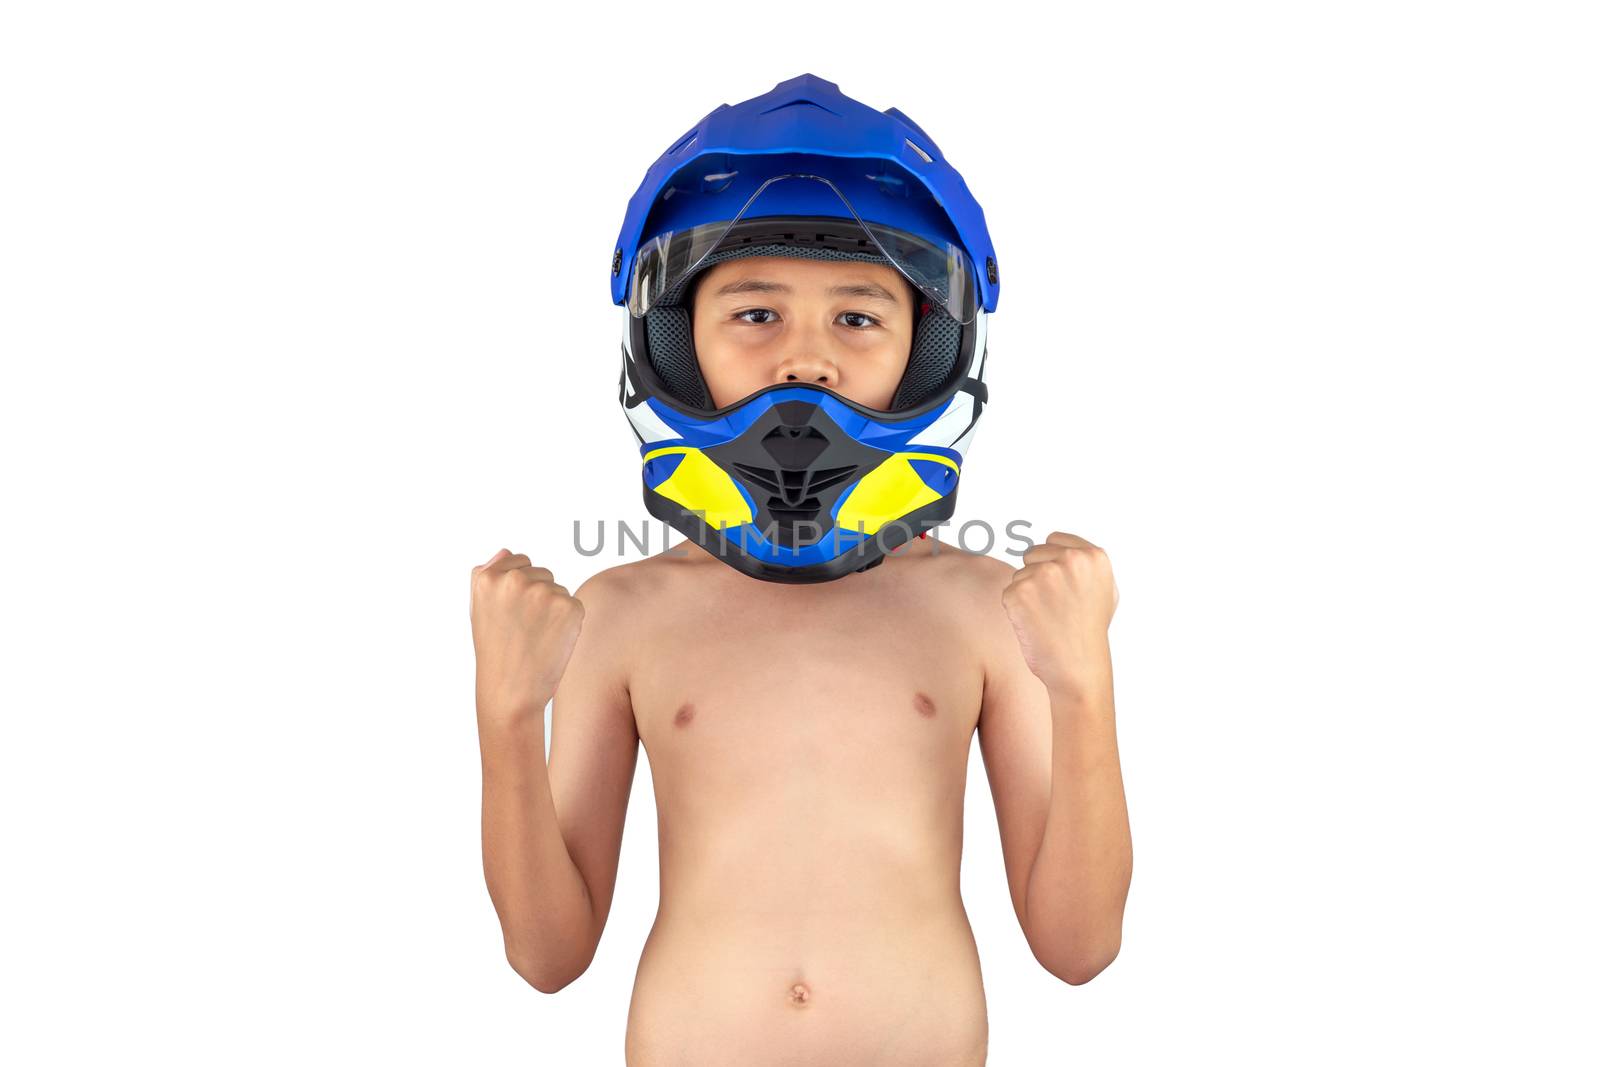 A boy wearing a motocross helmet standing but without a shirt isolated on white background.